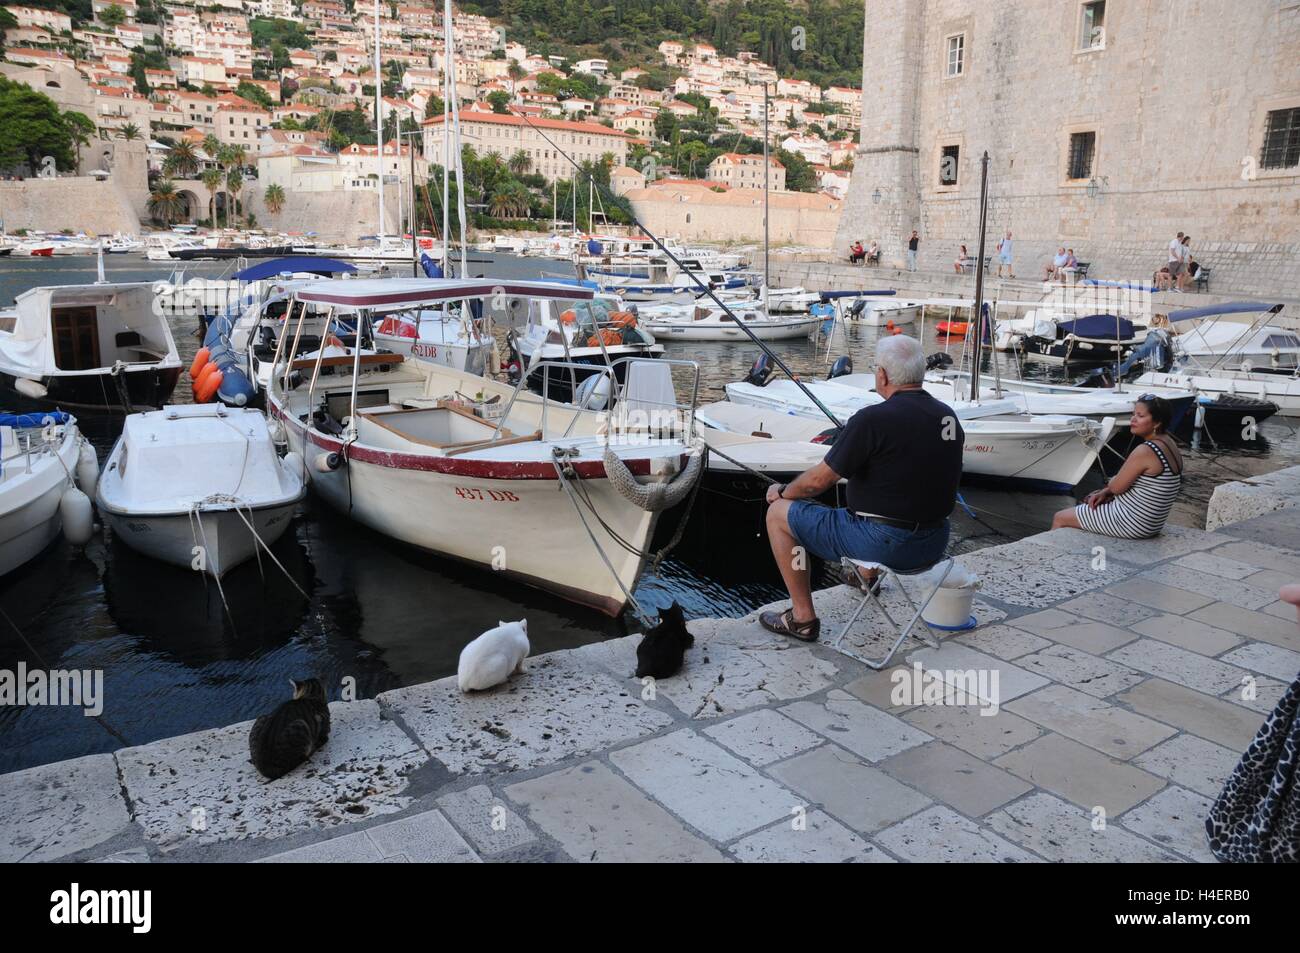 https://c8.alamy.com/comp/H4ERB0/a-man-fishing-alongside-cats-in-the-harbour-in-dubrovnik-H4ERB0.jpg